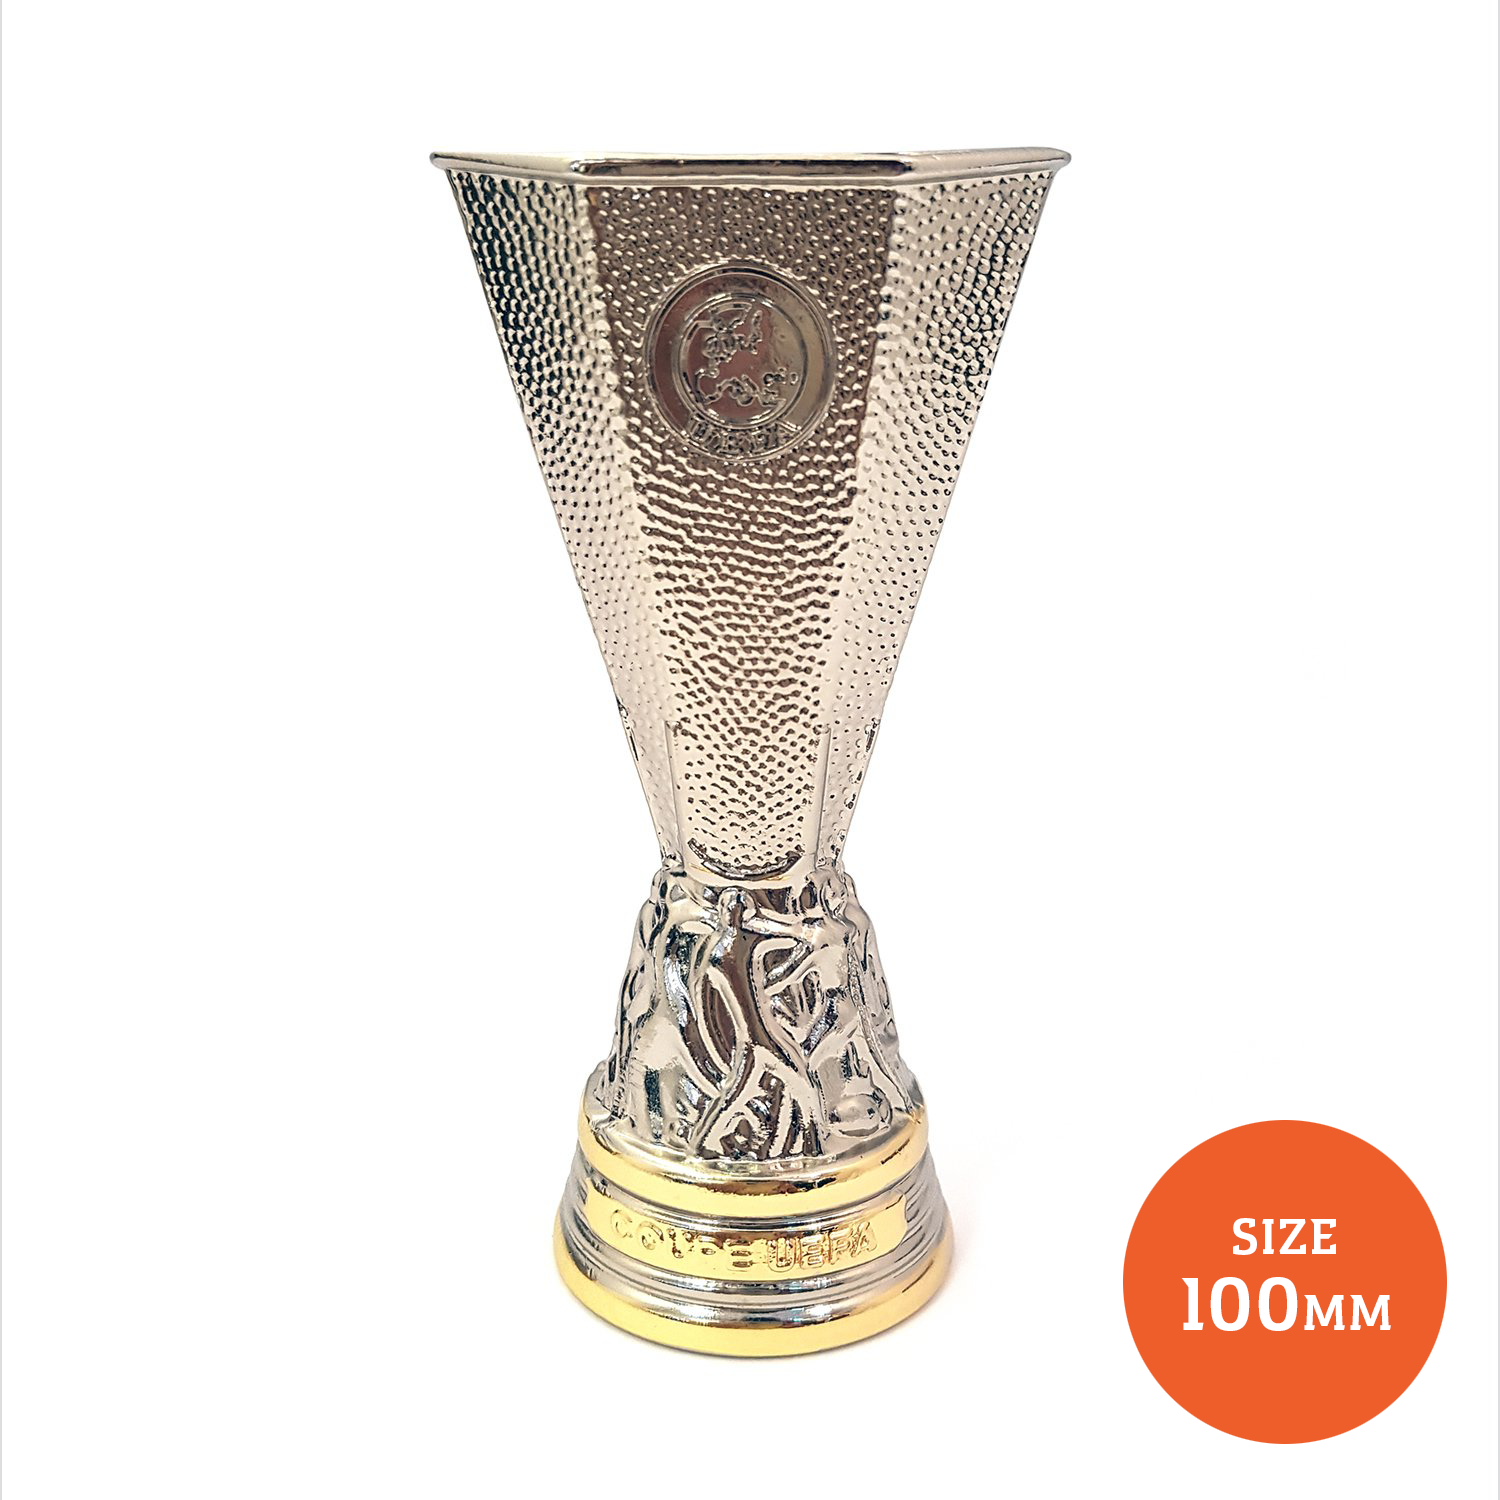 UEFA Europa League 100mm 3D Replica Trophy UEFA Club Competitions Online Store